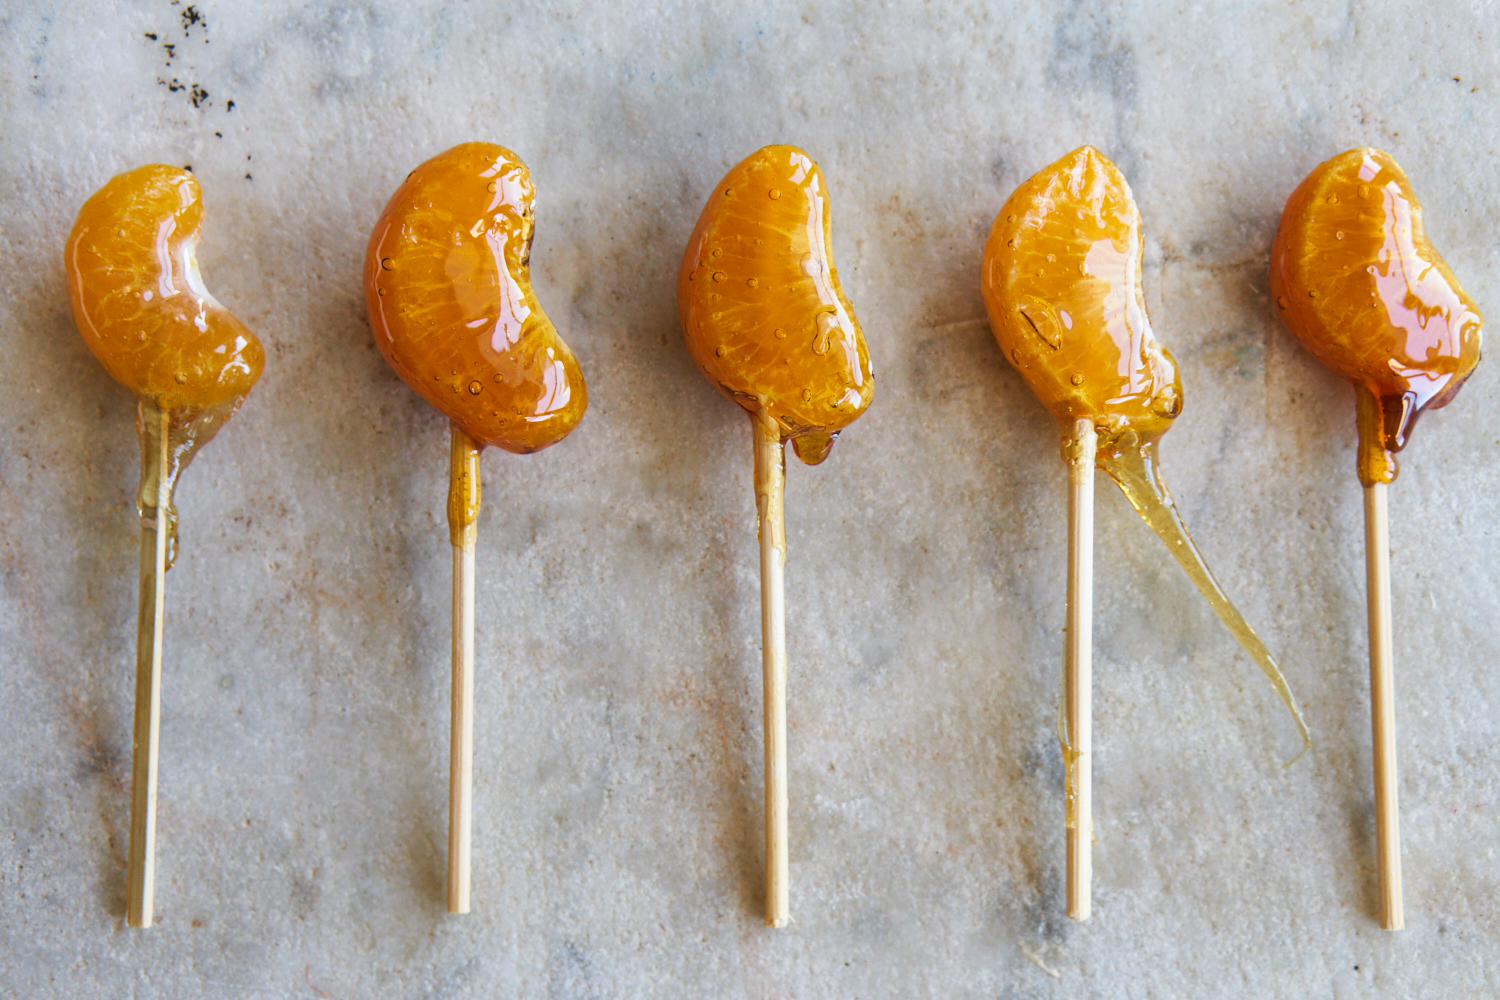 Two-ingredient Candied Citrus Pops